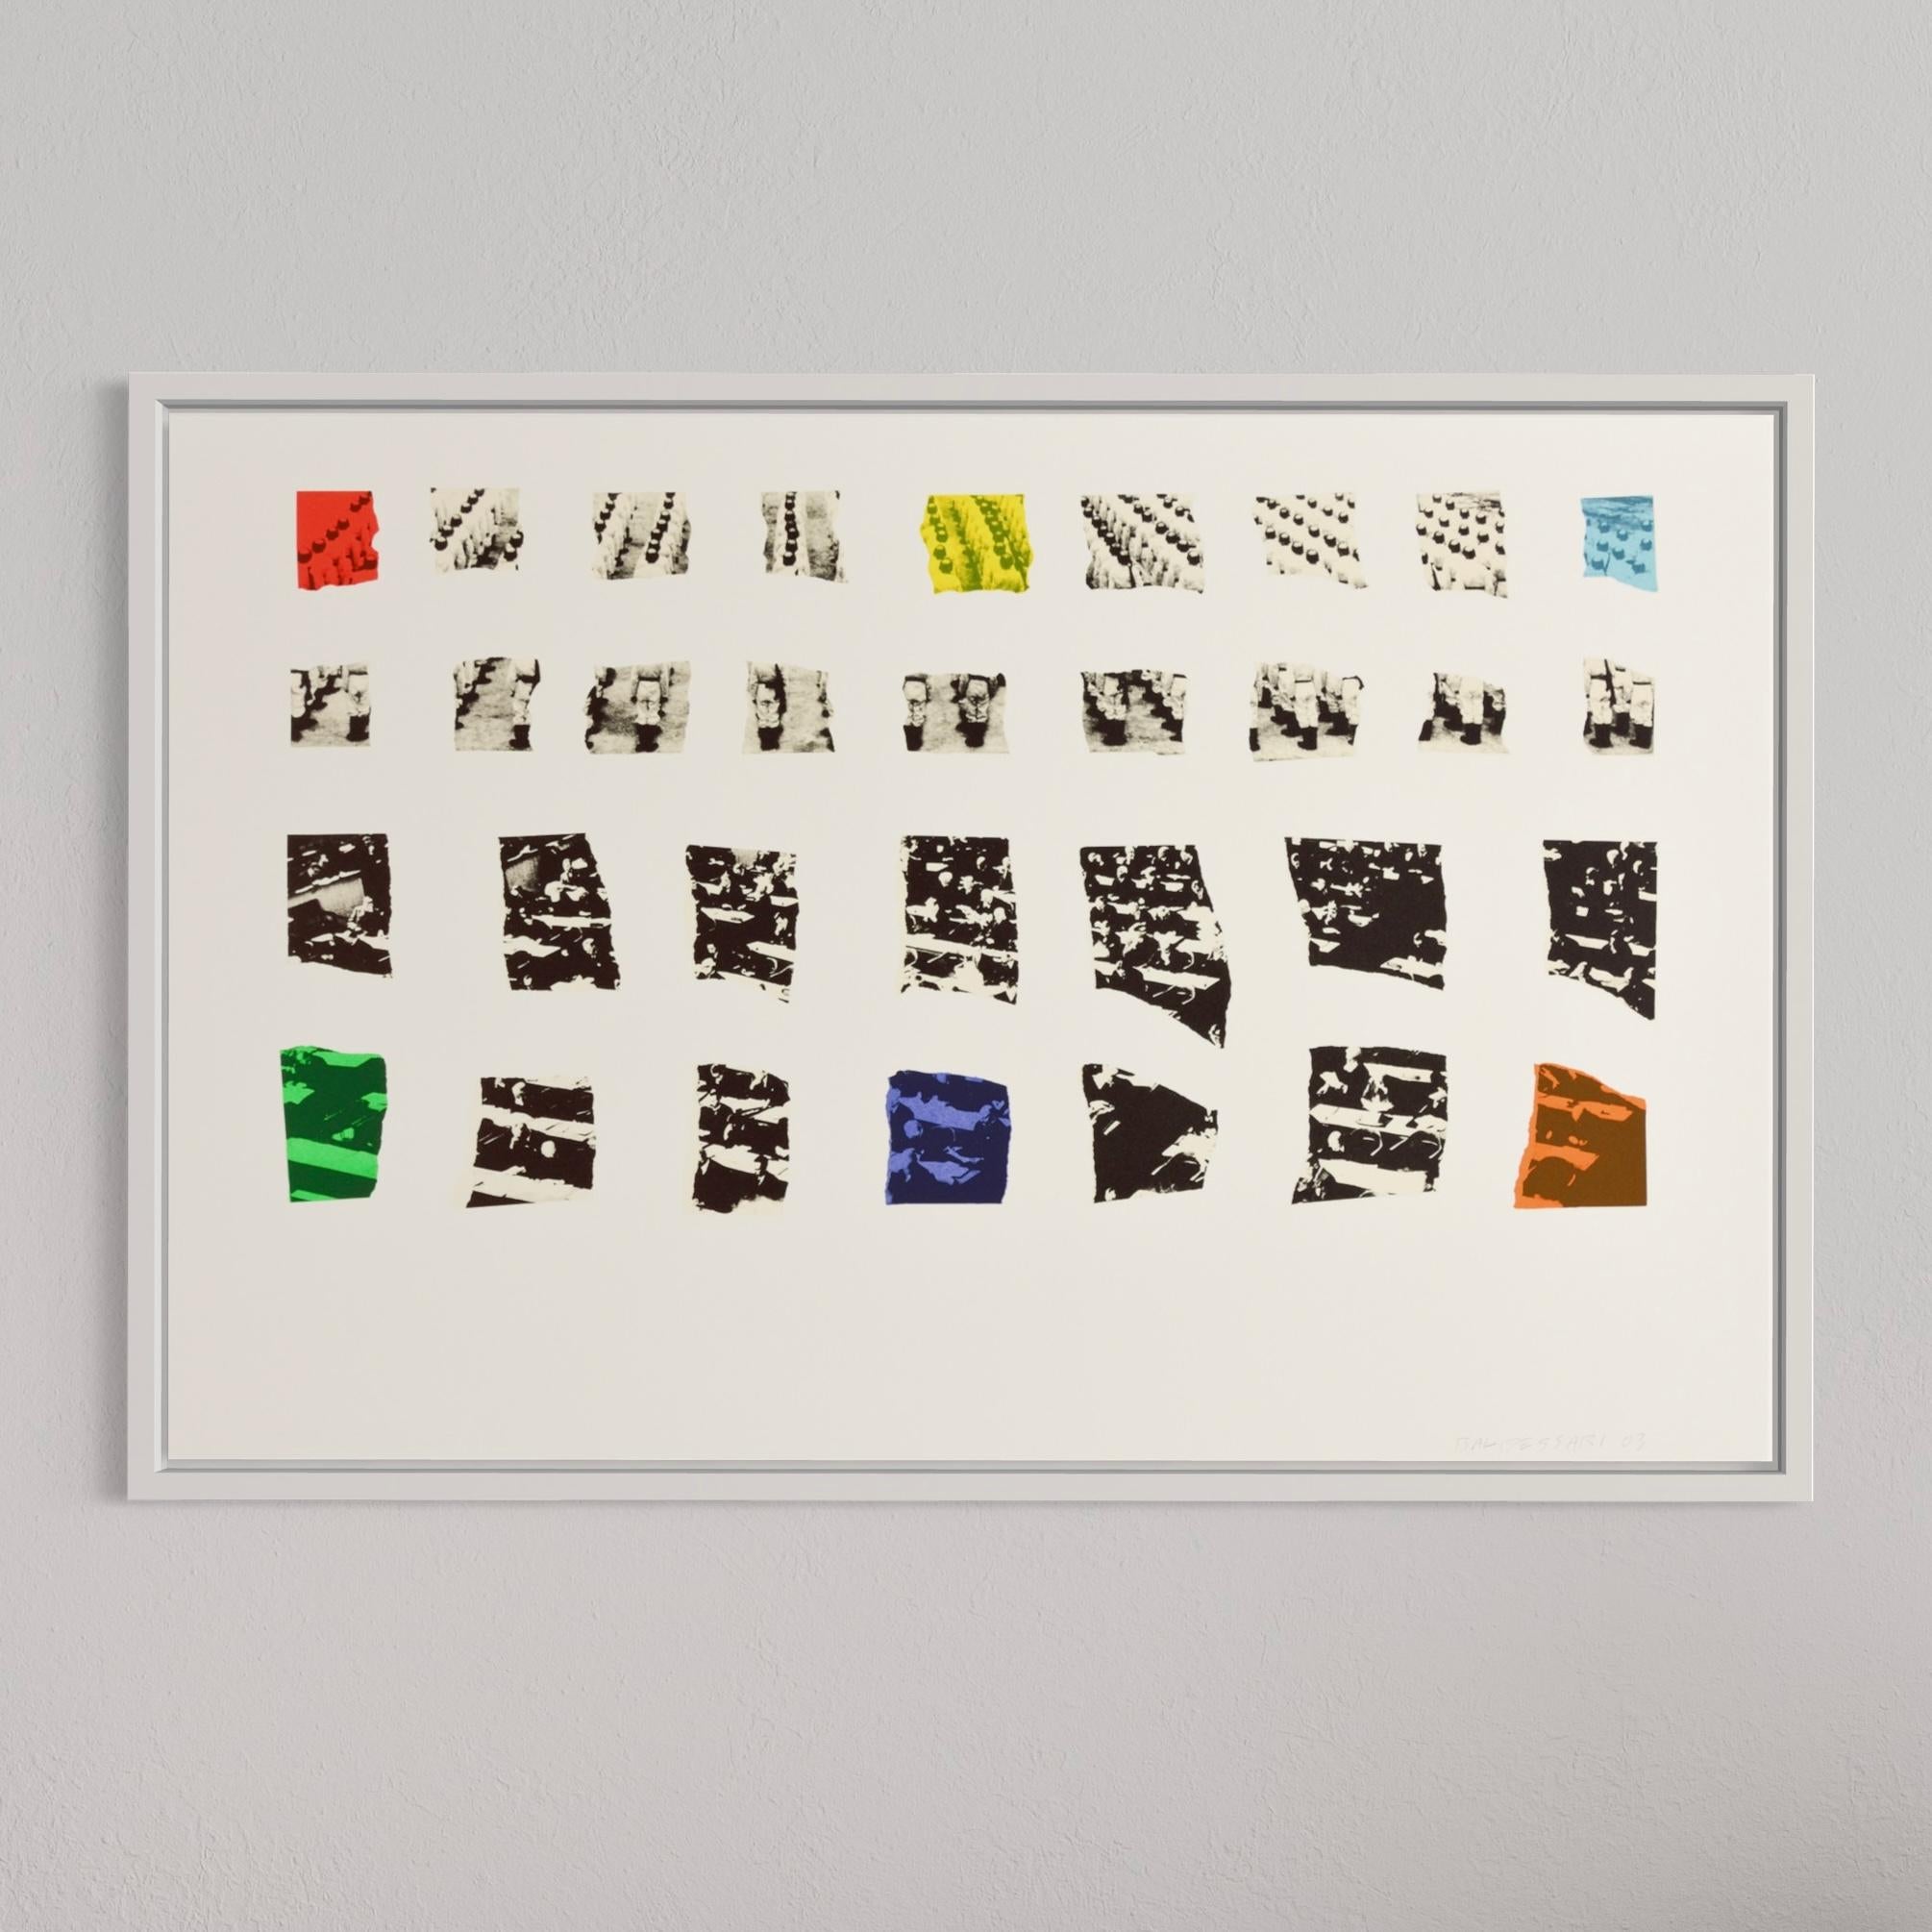 John Baldessari (American, 1931-2020)
Two Assemblages (with R, O, Y, G, B, V Transparent), 2003
Medium: Lithograph and screen print on vellum
Dimensions: 61.6 x 91.5 cm
Edition of 50: Hand-signed, numbered and dated
Condition: Excellent